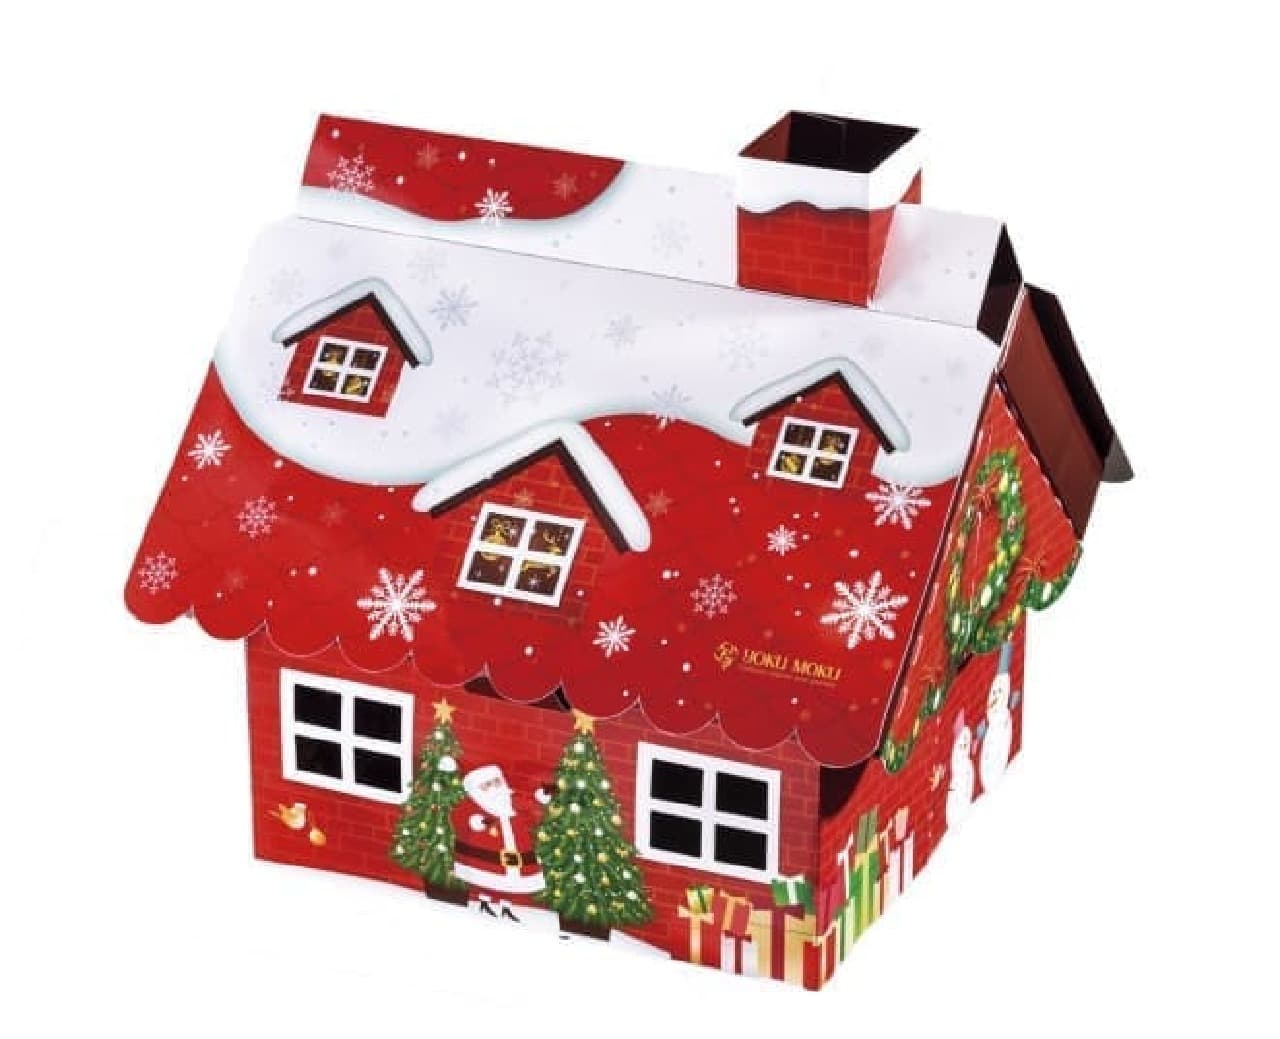 Christmas products such as "Hexen House" from Yoku Moku